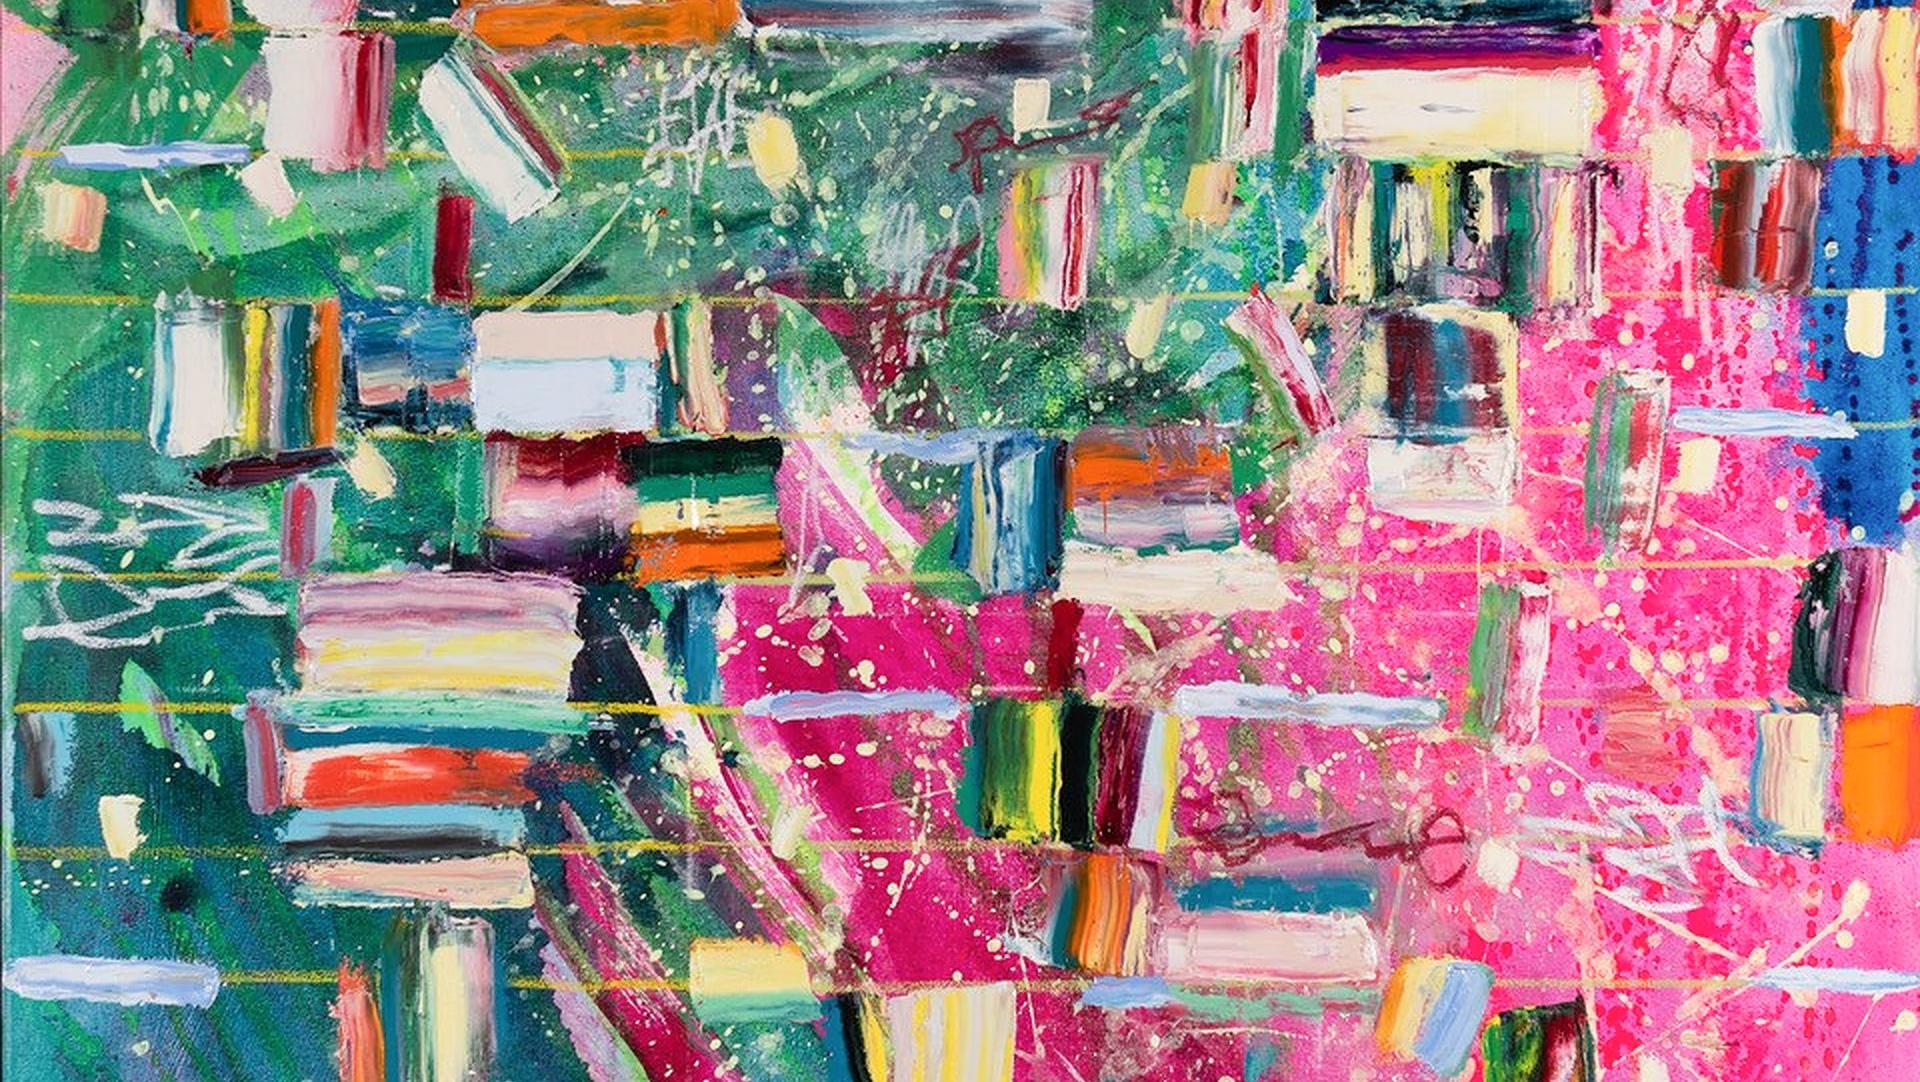 Stairway to June, original oil over acrylic on canvas painting by American artist Monroe Hodder. Hodder’s abstract paintings are gloriously bold. Inspired by the urban backdrops of her life in New York and London, Hodder is not afraid to play with a